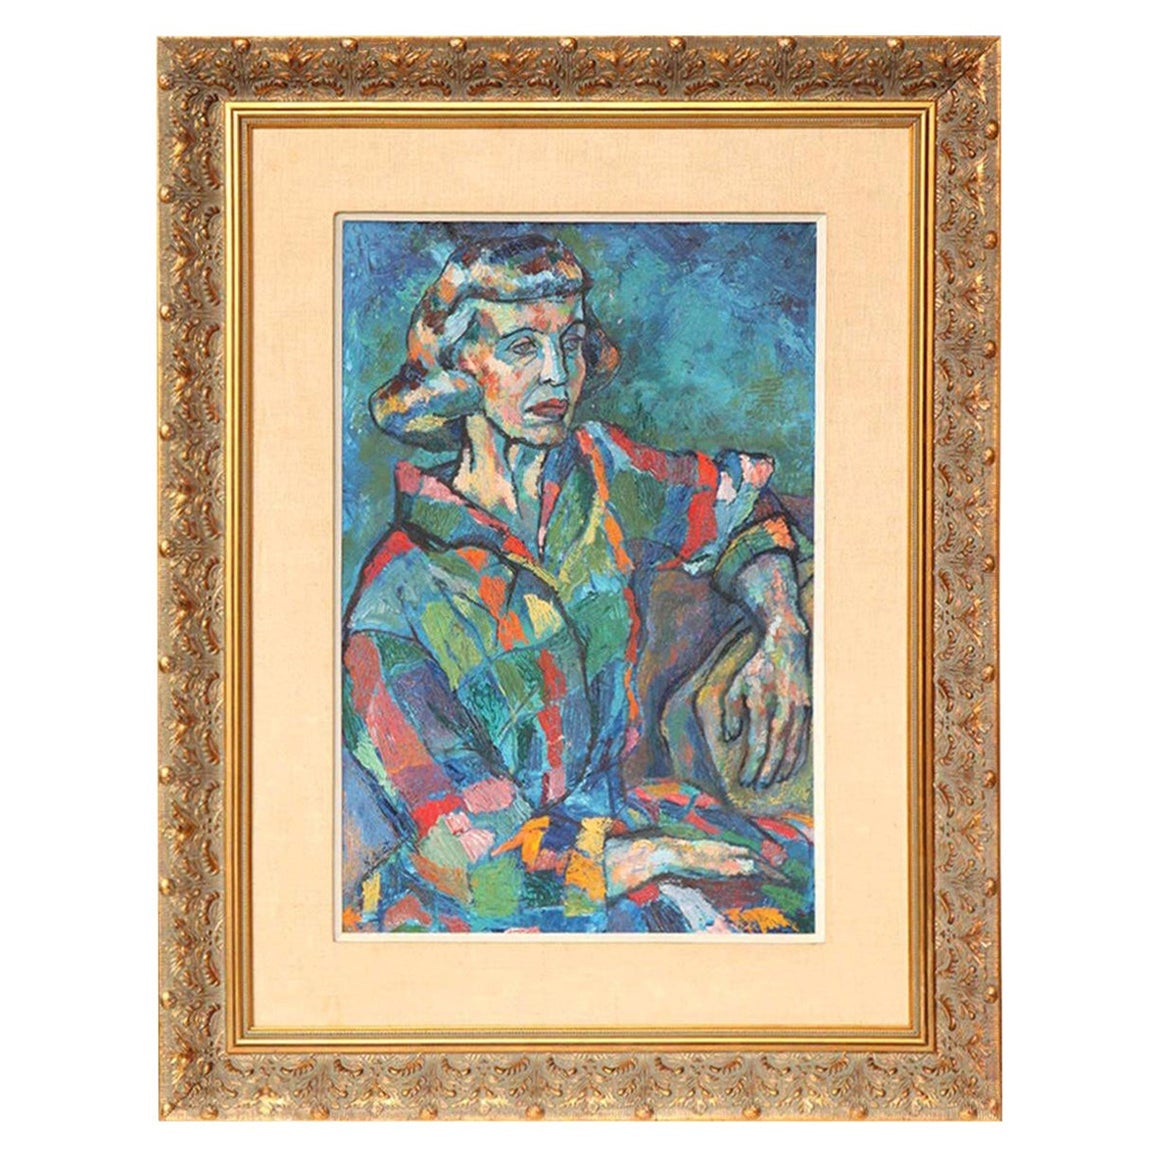 Painting Mid-Century Portrait of a Lady Mid-Century Modern Art, C 1950, Signed